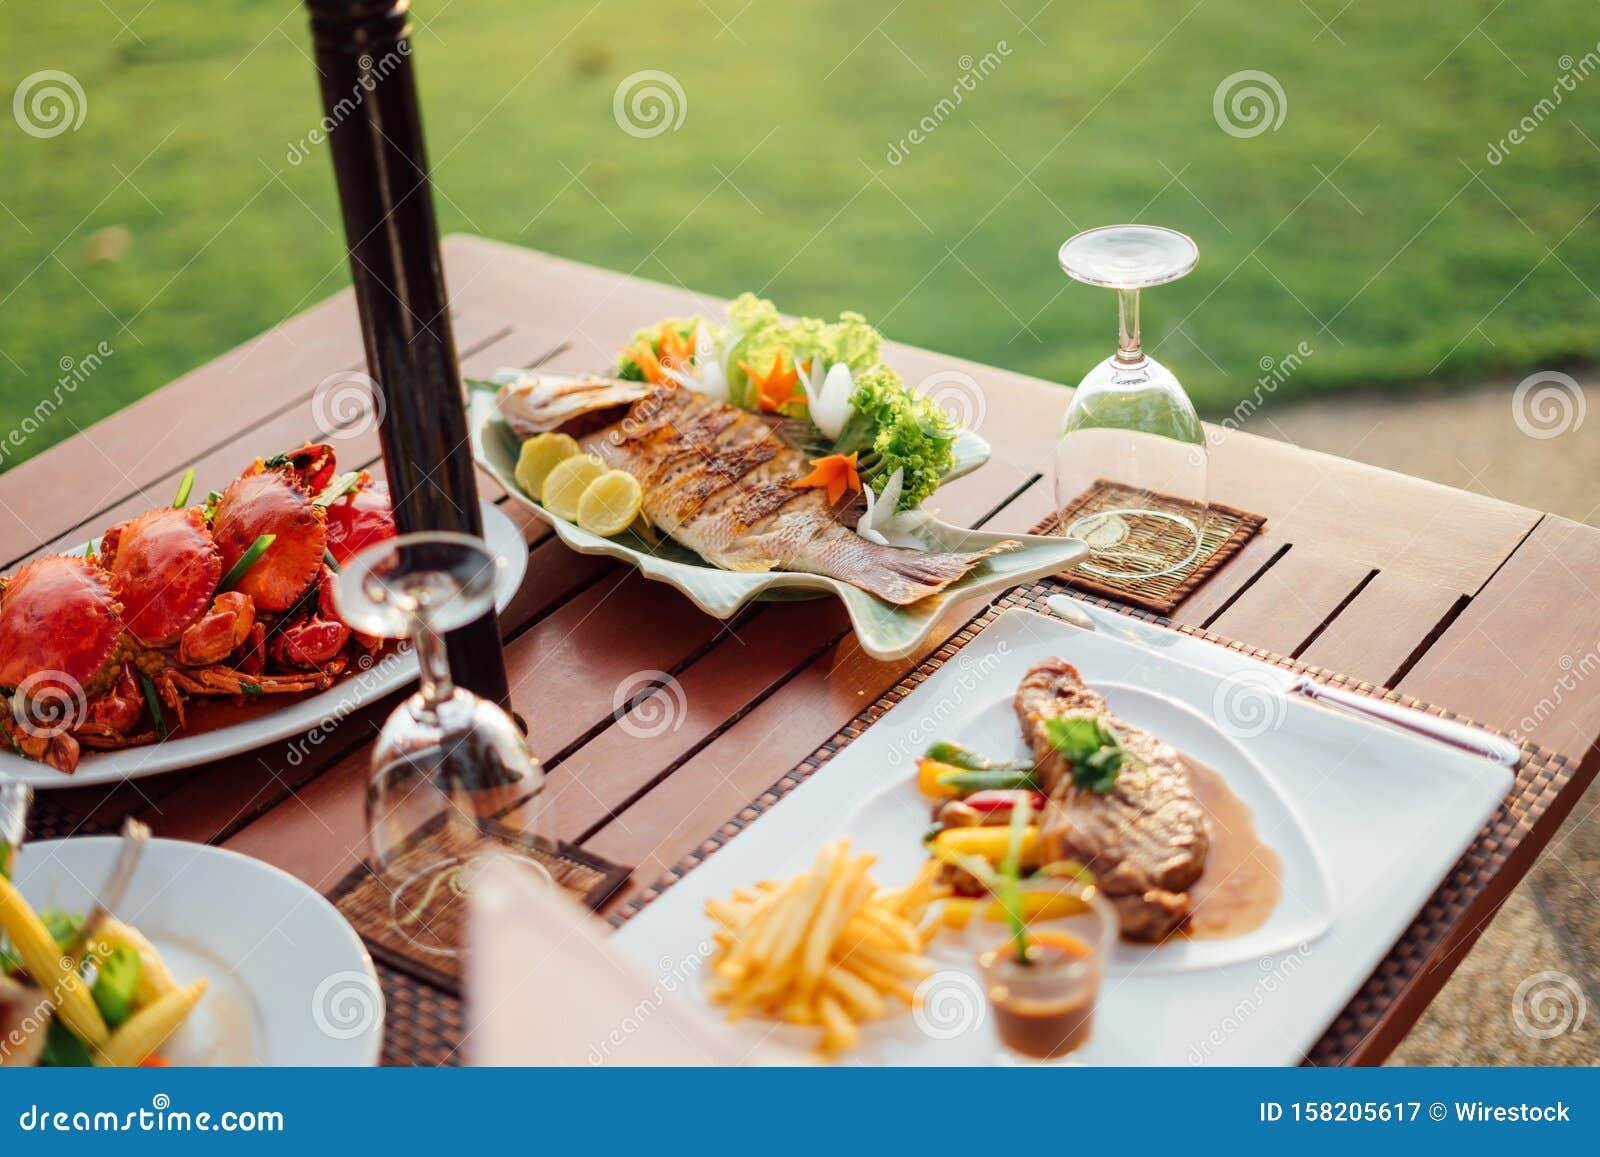 Close Shot Of Dish With Fish Near Crabs On A Wooden Table